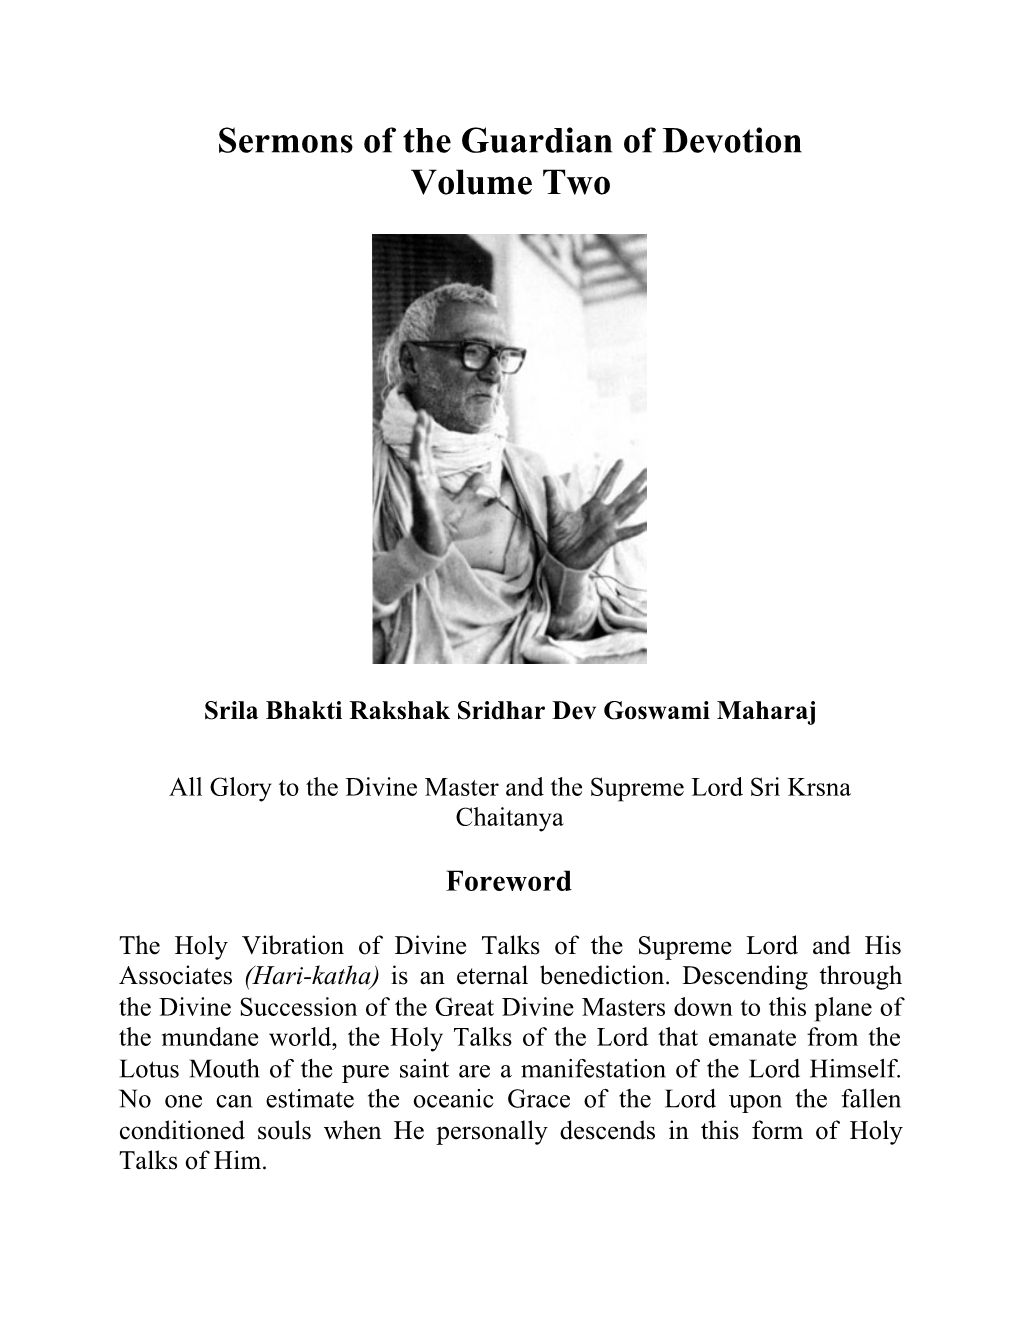 Sermons of the Guardian of Devotion Volume 2